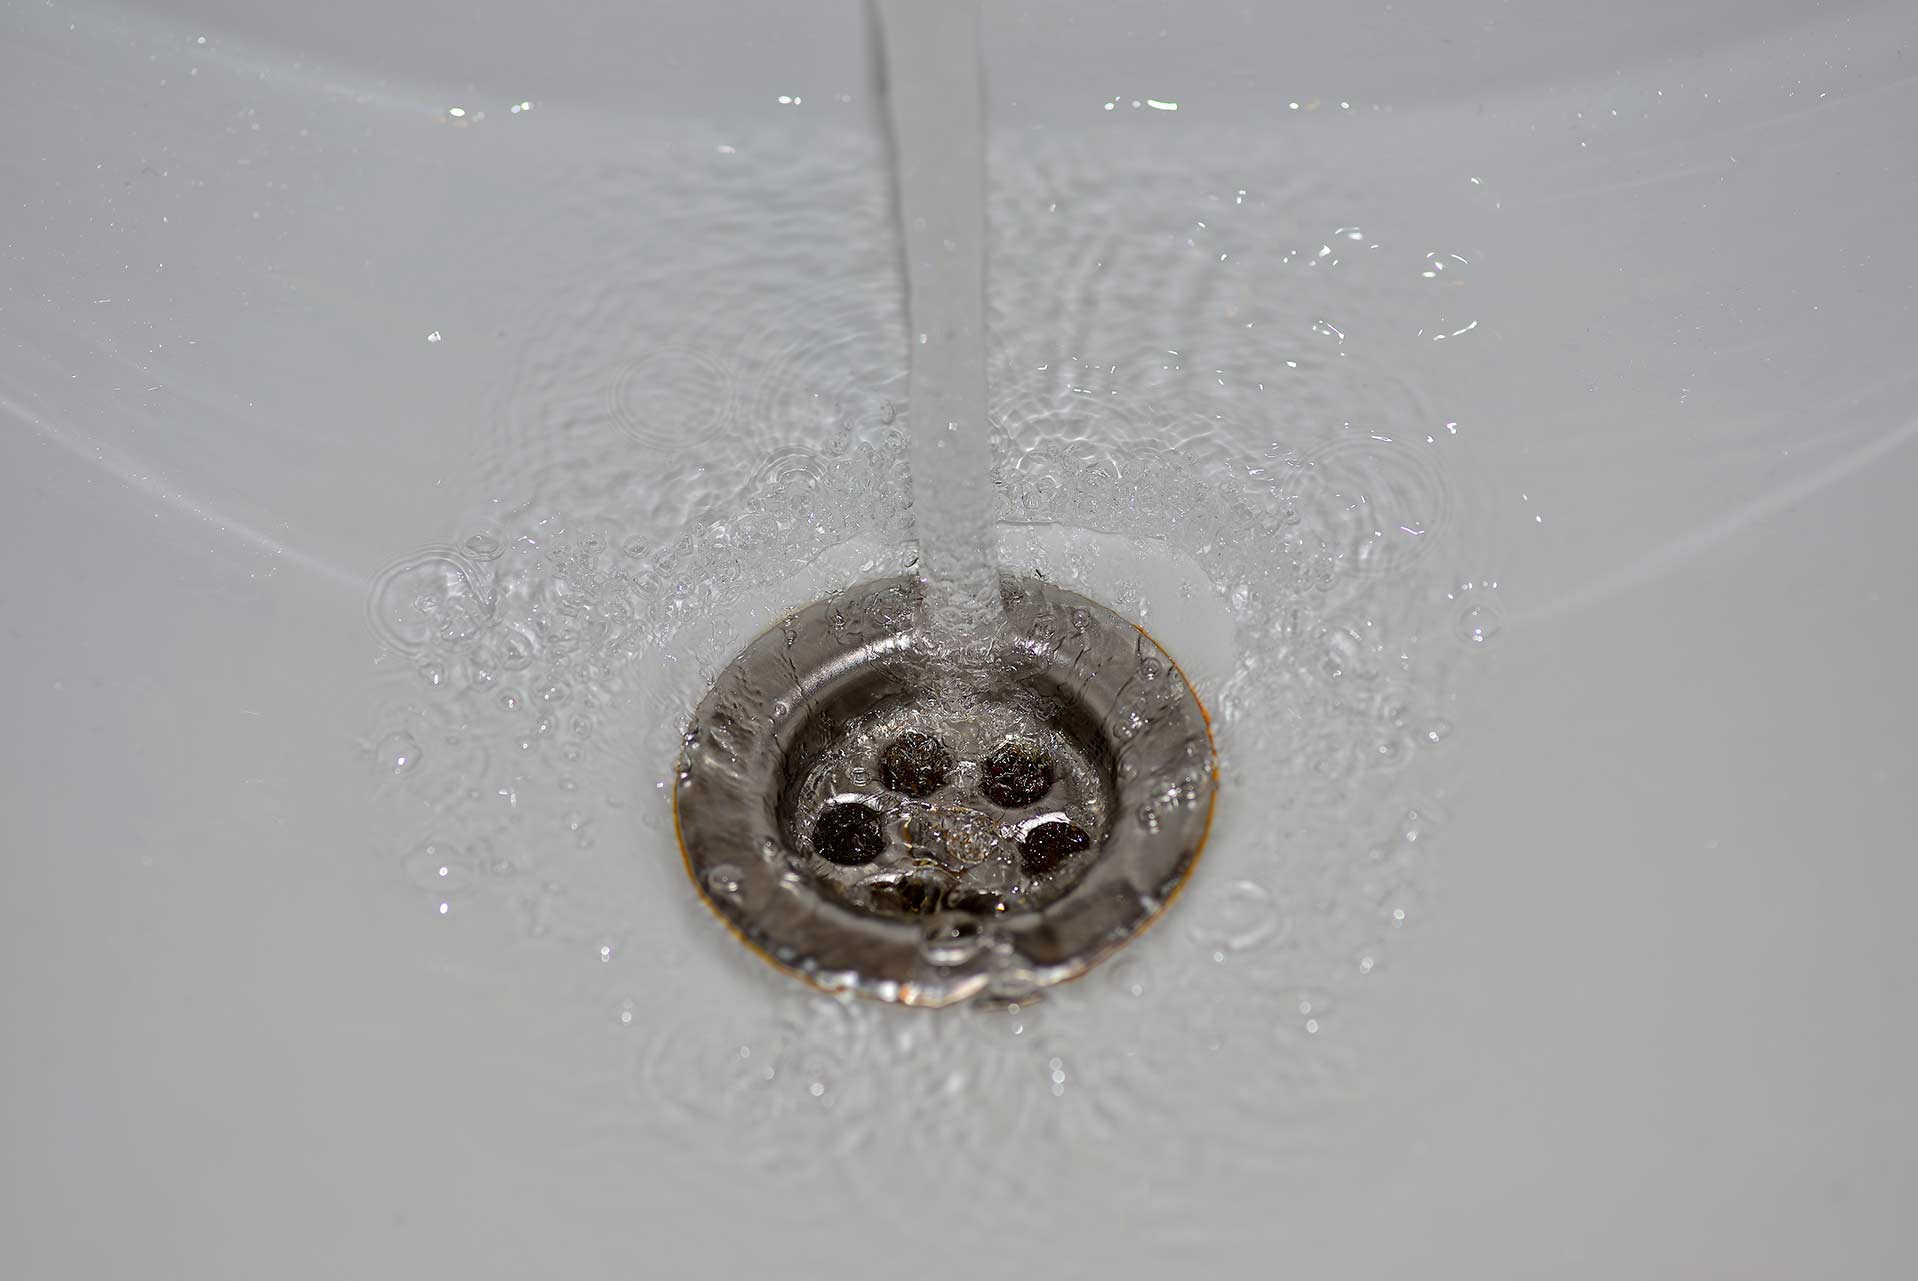 A2B Drains provides services to unblock blocked sinks and drains for properties in Stoke Newington.